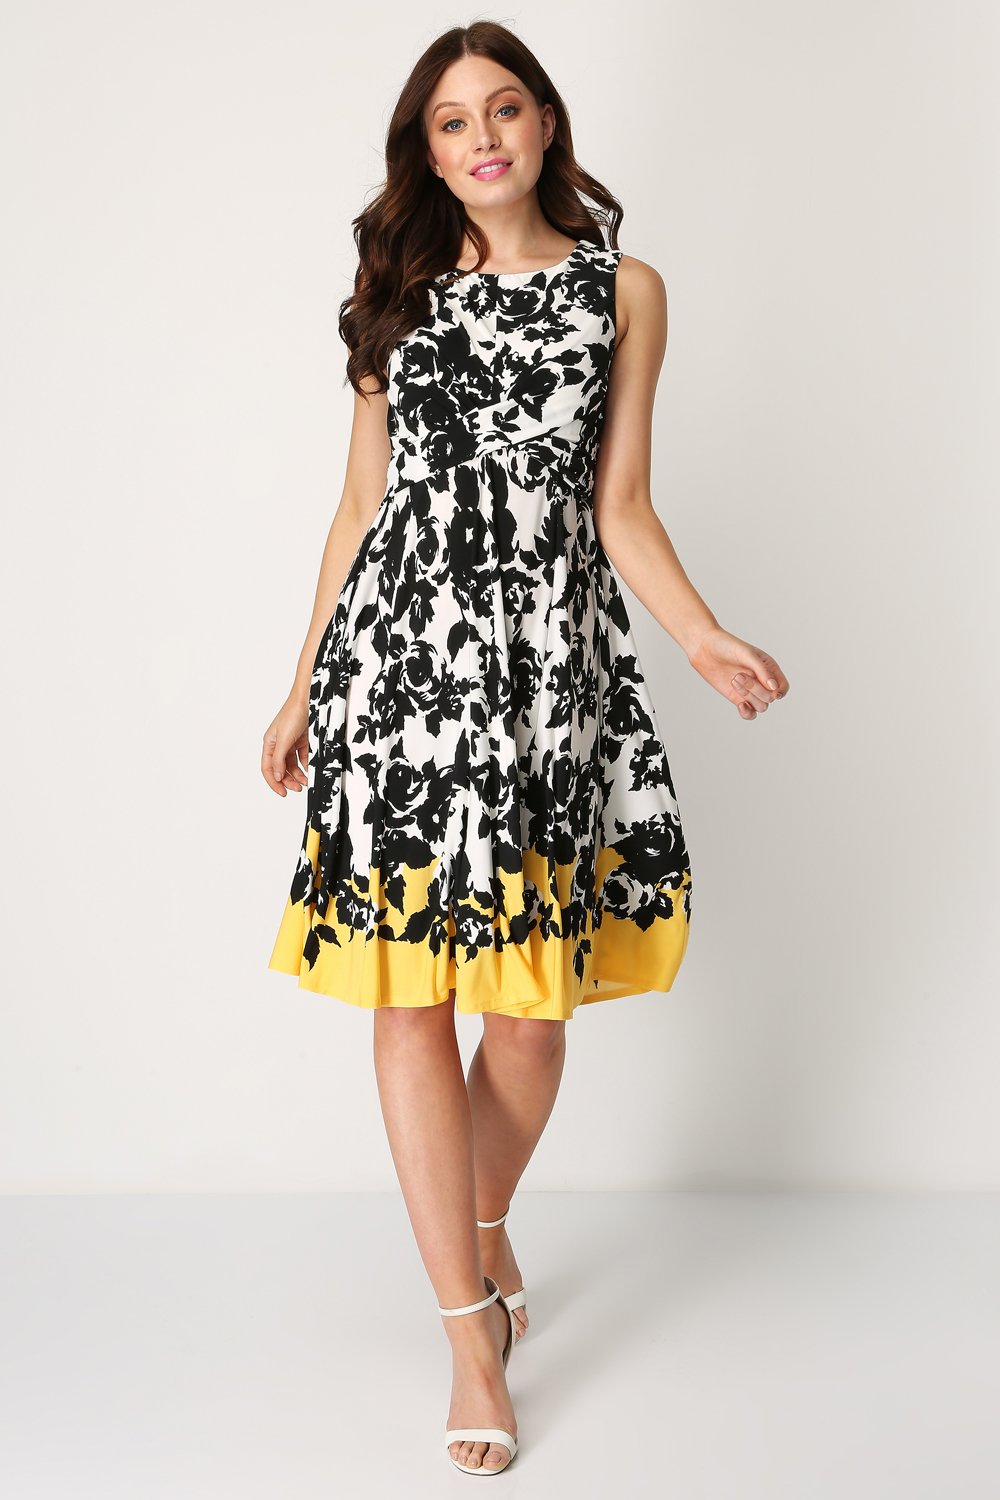 Yellow Fit and Flare Contrast Floral Dress, Image 3 of 4